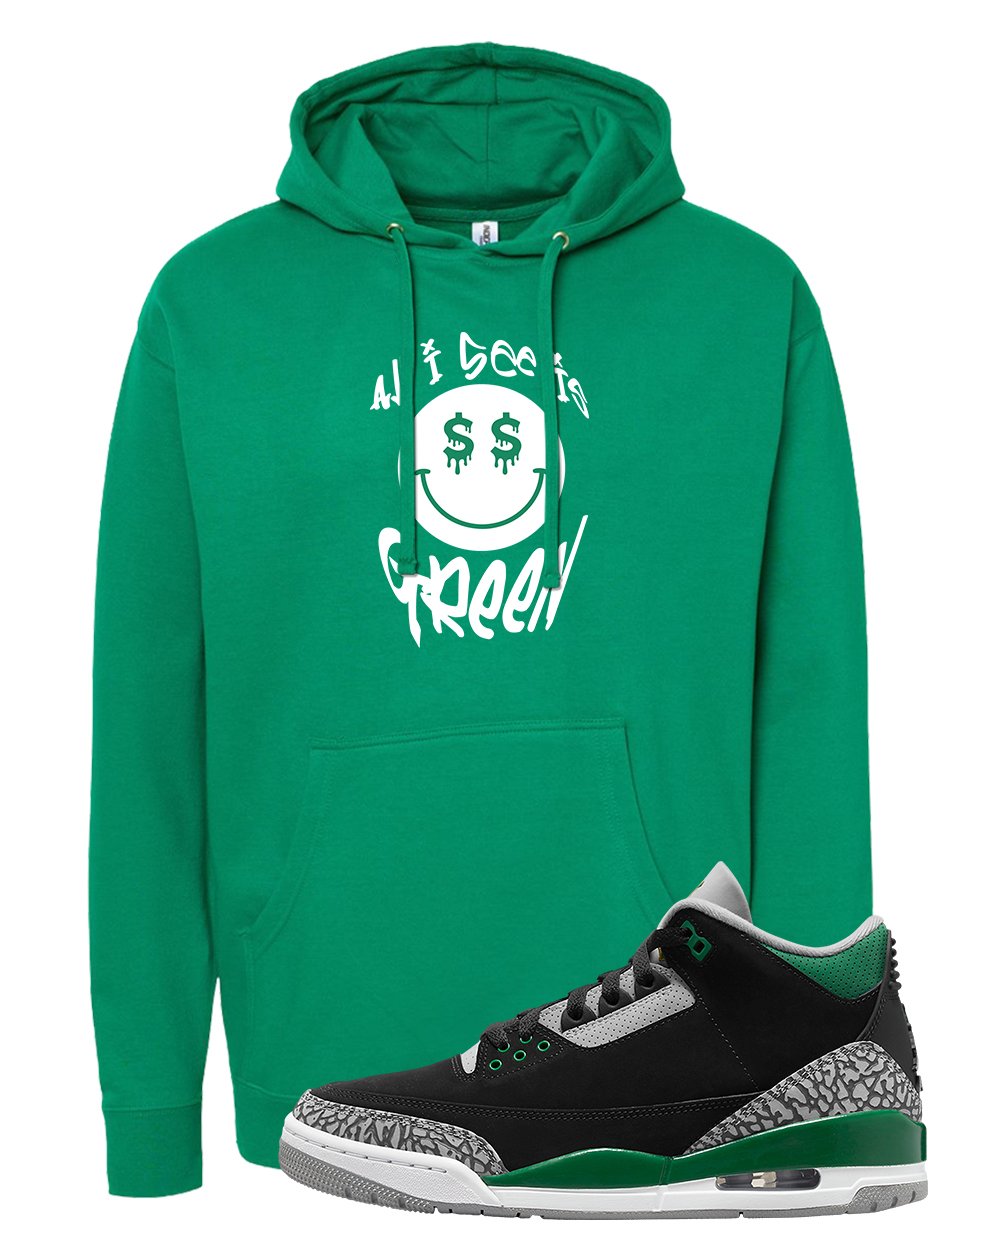 Pine Green 3s Hoodie | All I See Is Green, Kelly Green